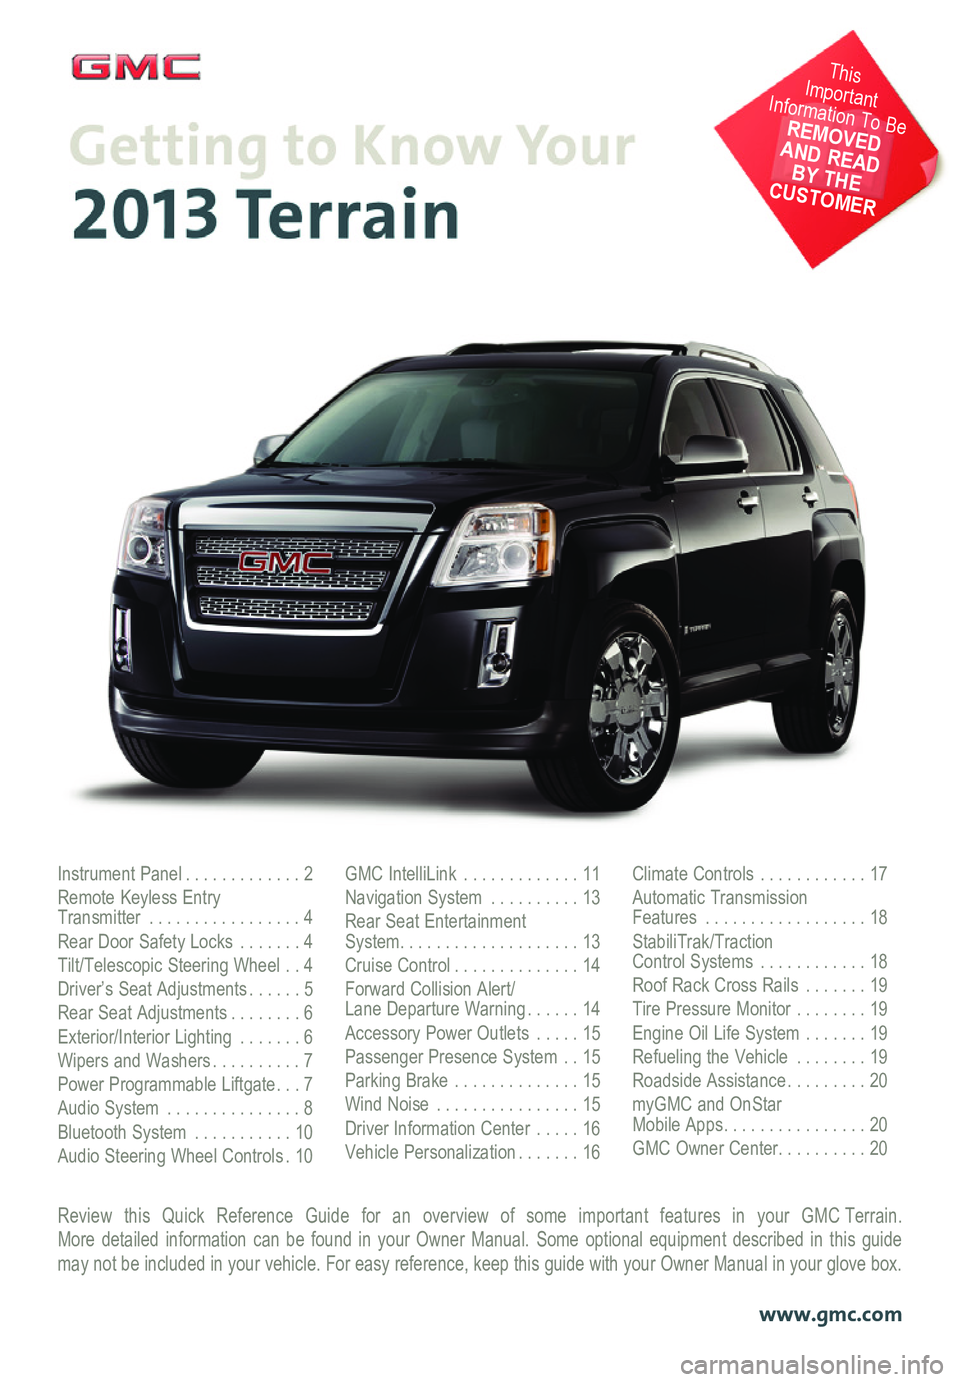 GMC TERRAIN 2017  Get To Know Guide Review this Quick Reference Guide for an overview of some important features in your GMC Terrain.  More detailed information can be found in your Owner Manual. Some option\
al equipment described in t